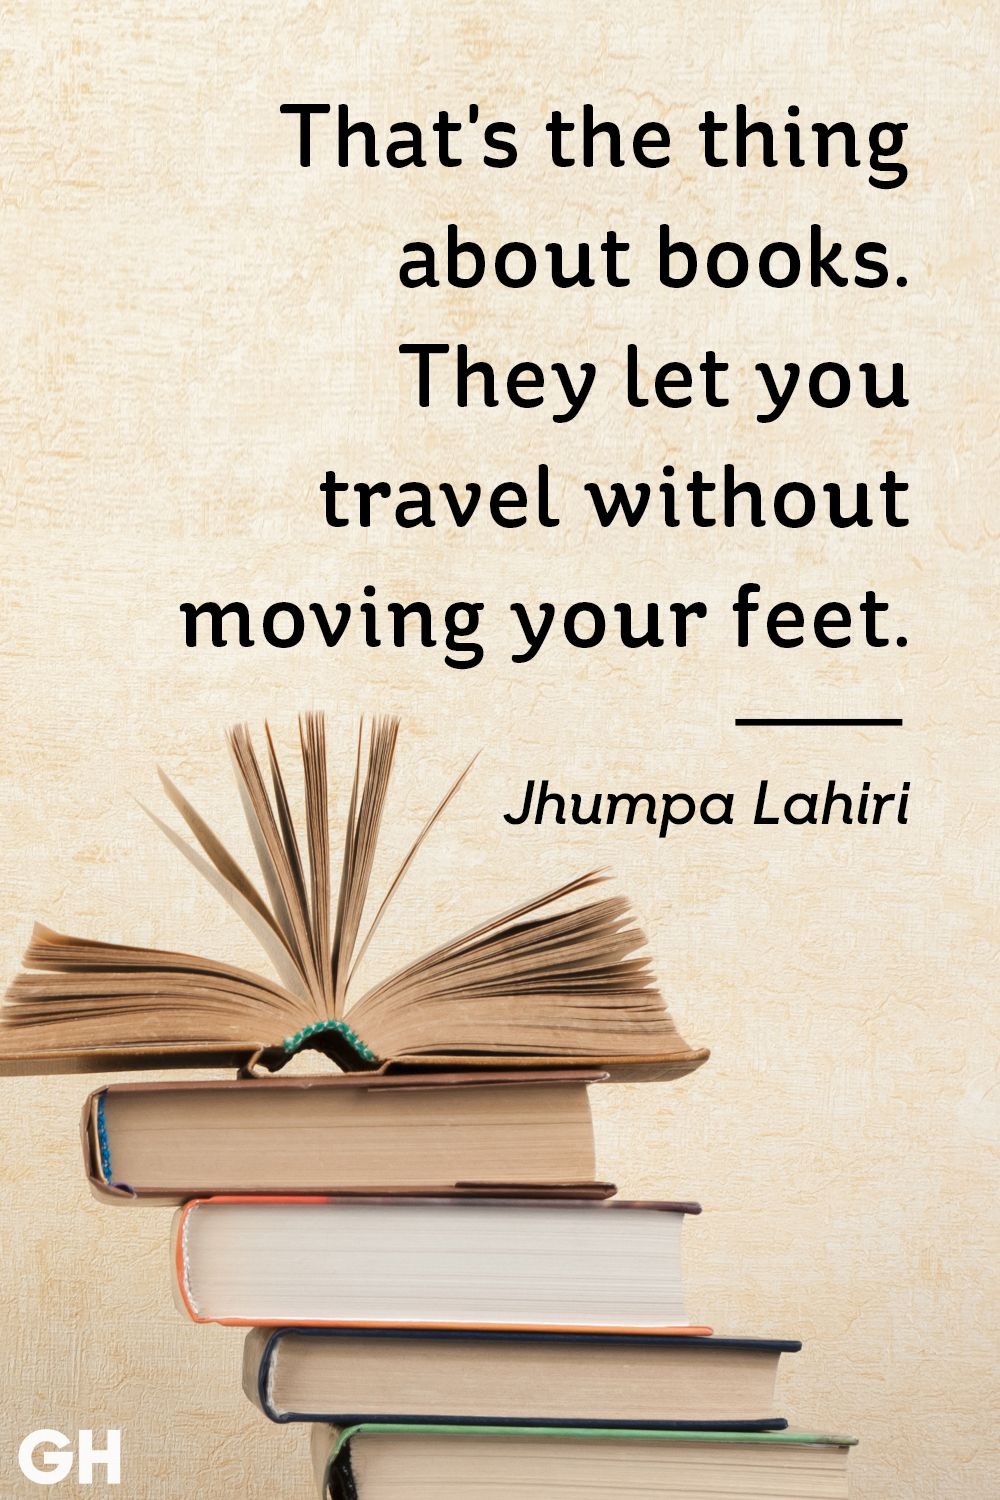 that’s the thing about books. they let you travel withotu moving your feet. jhumpa lahiri